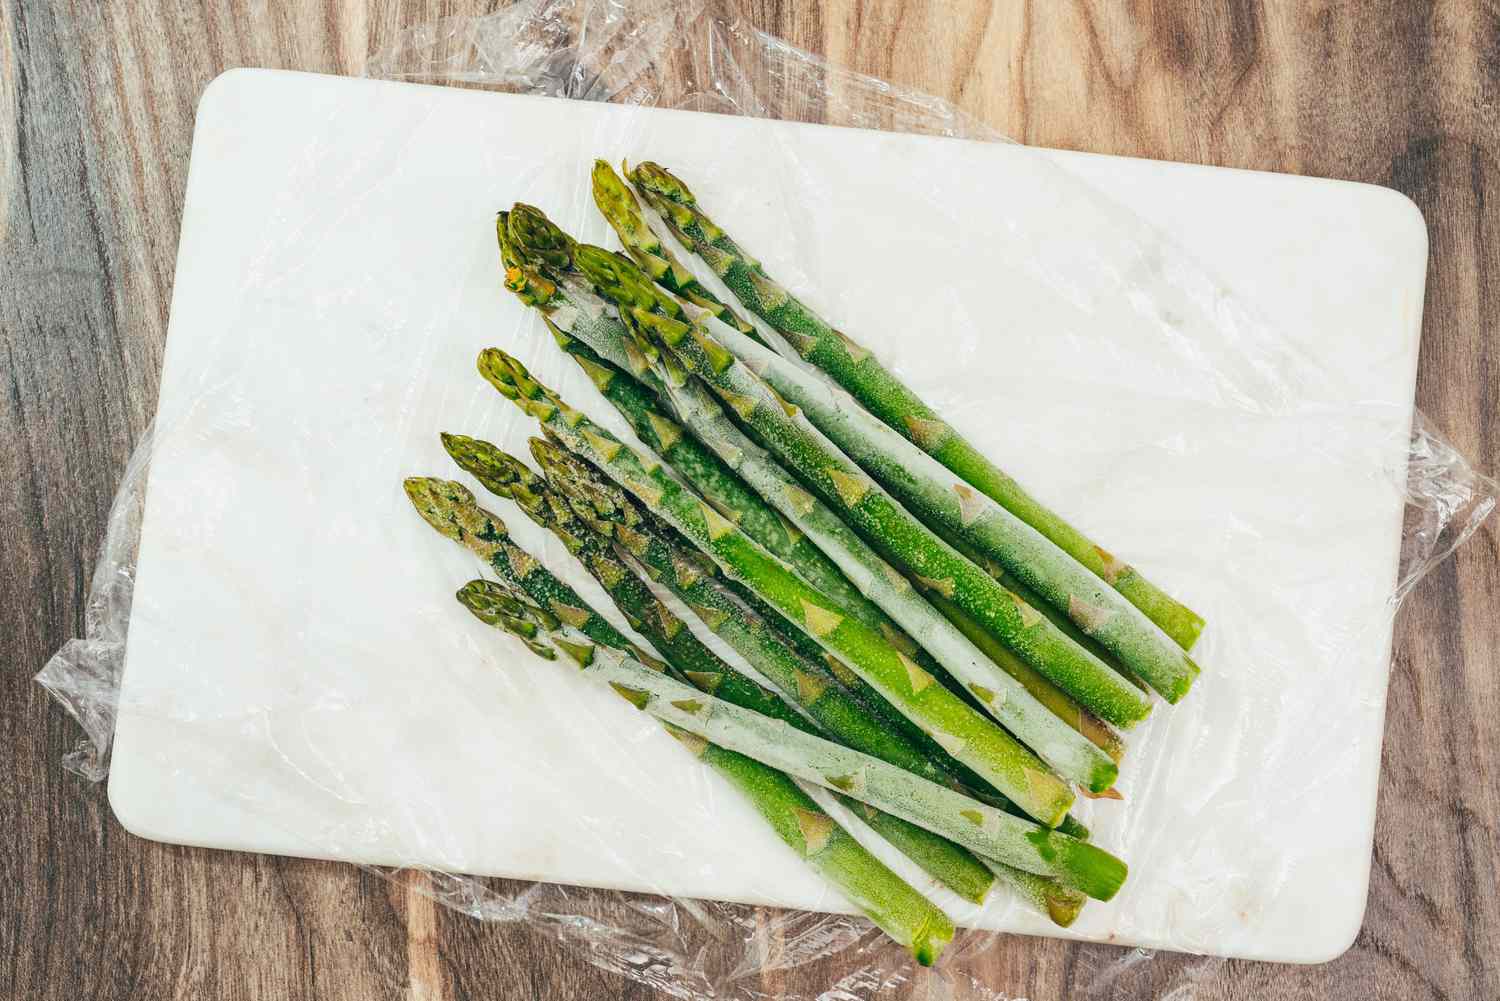 How To Store Asparagus In Freezer